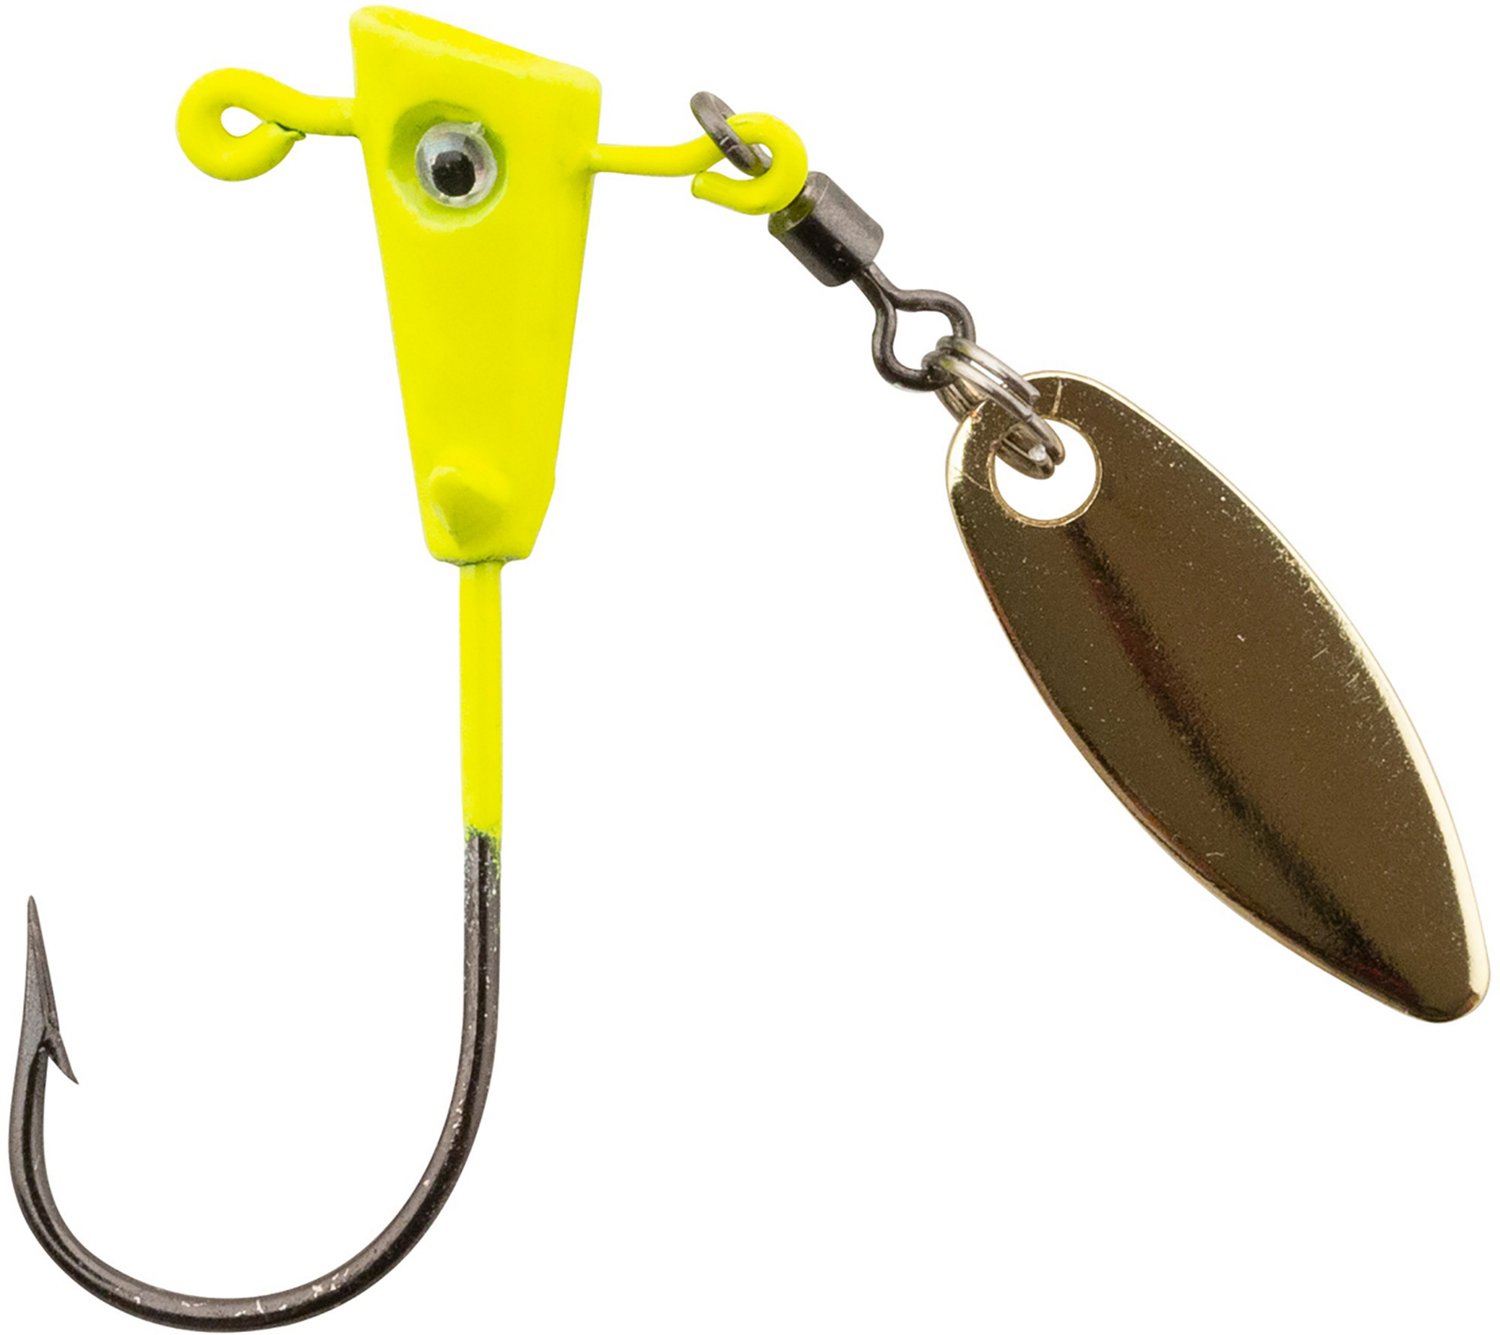 Leland's Lures Crappie Magnet Fin Spin Eyehole Jig Head - FishUSA